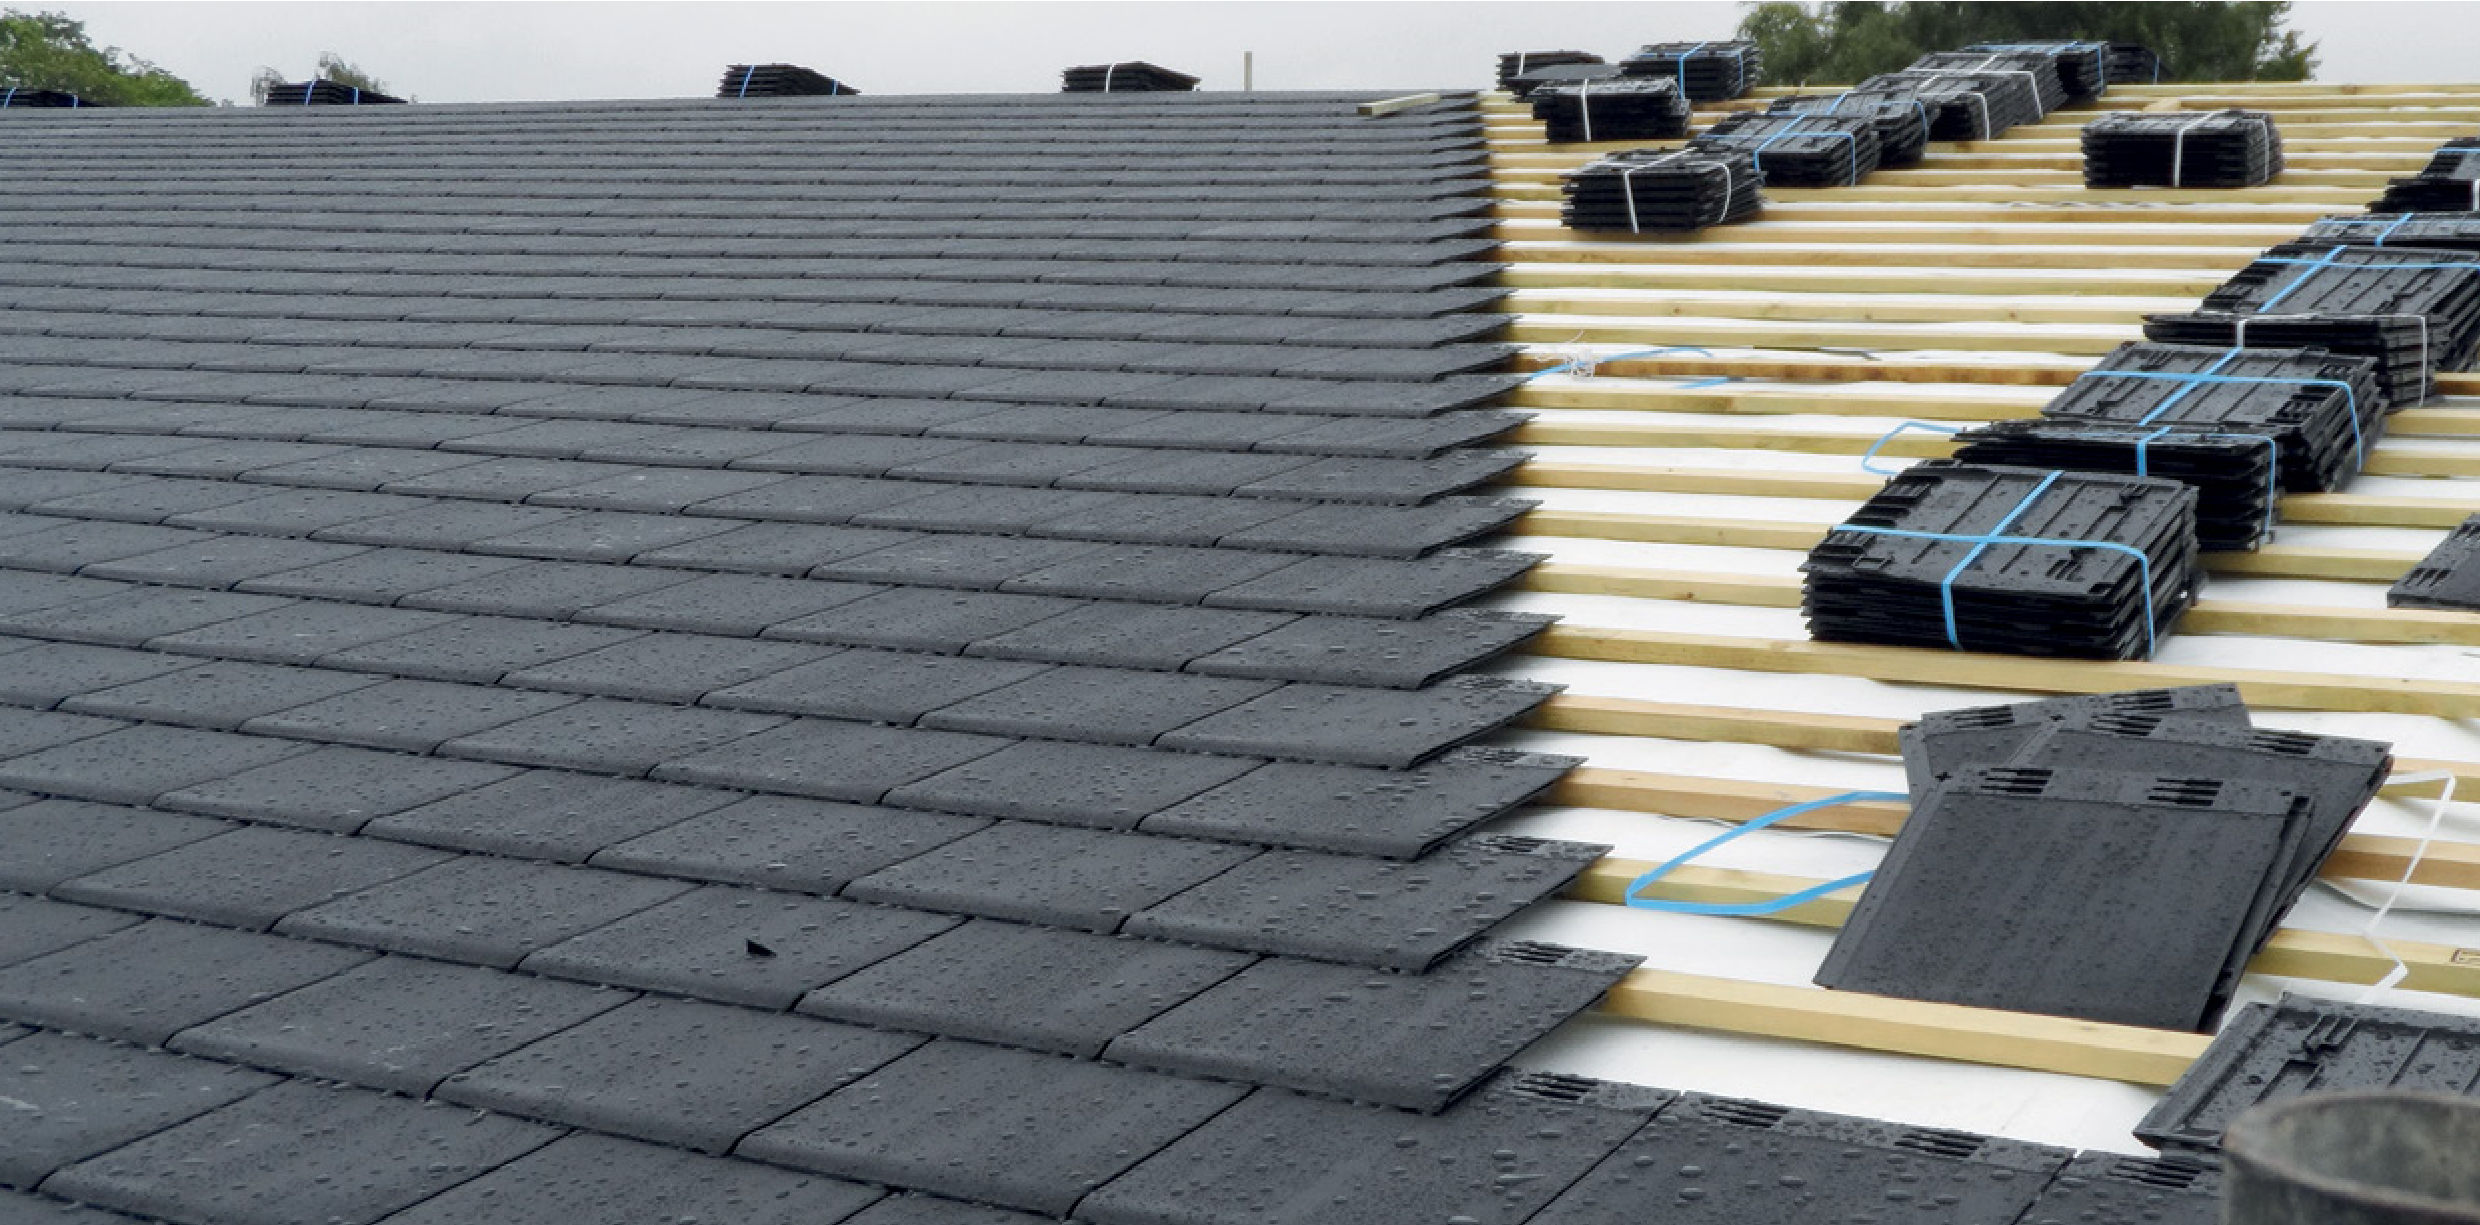 ENVIROTILE: THE LIGHTWEIGHT, SUSTAINABLE ROOF TILE @eurocellplc